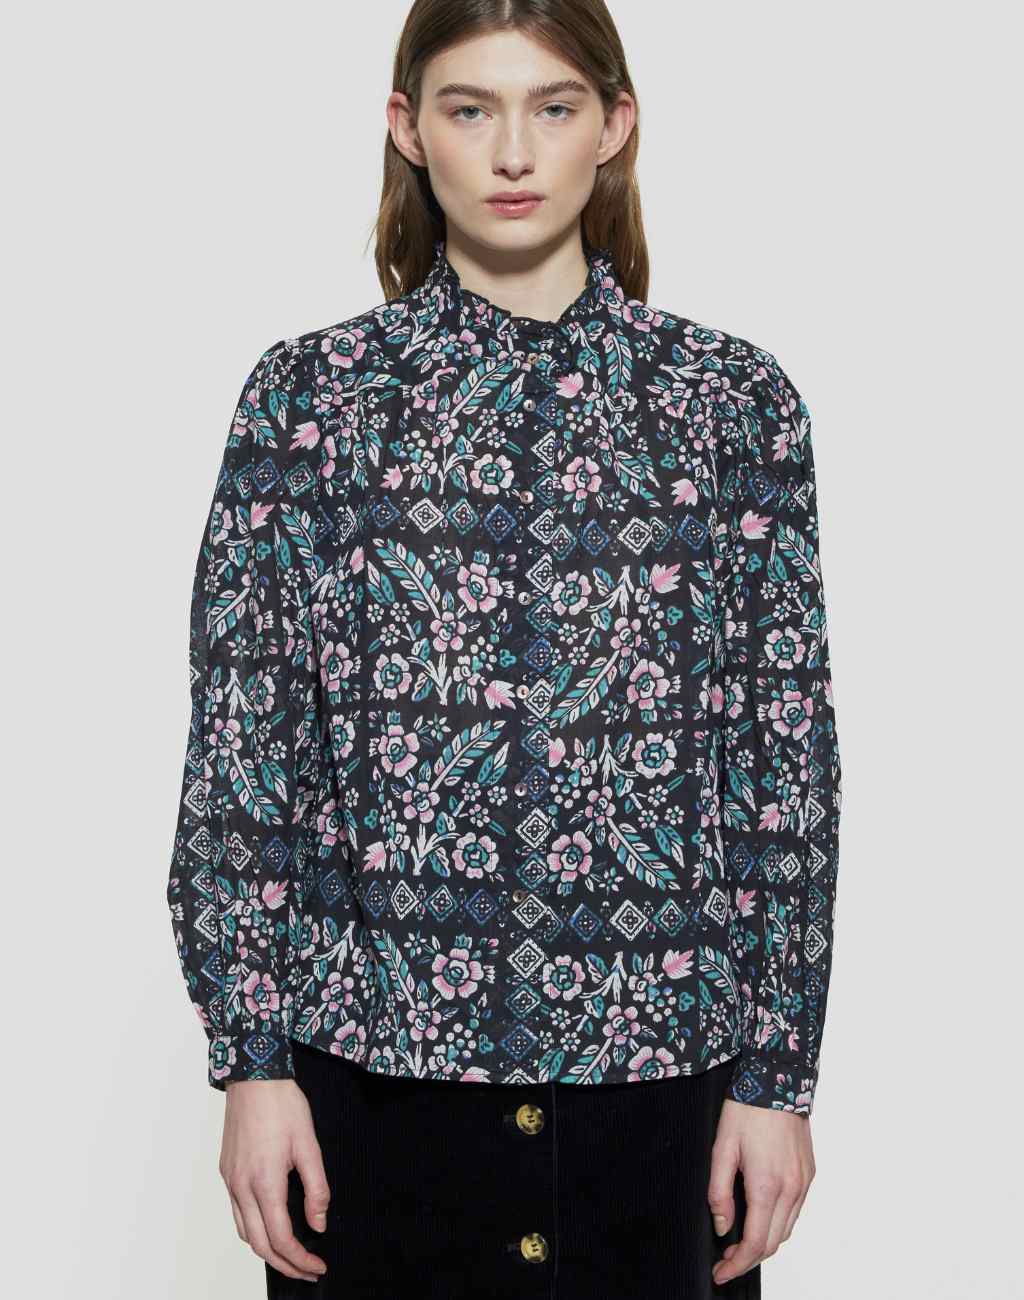 Block Print Flora Blouse with Floral and Geometric Print, Ruffle Collar, and Puffed Sleeves